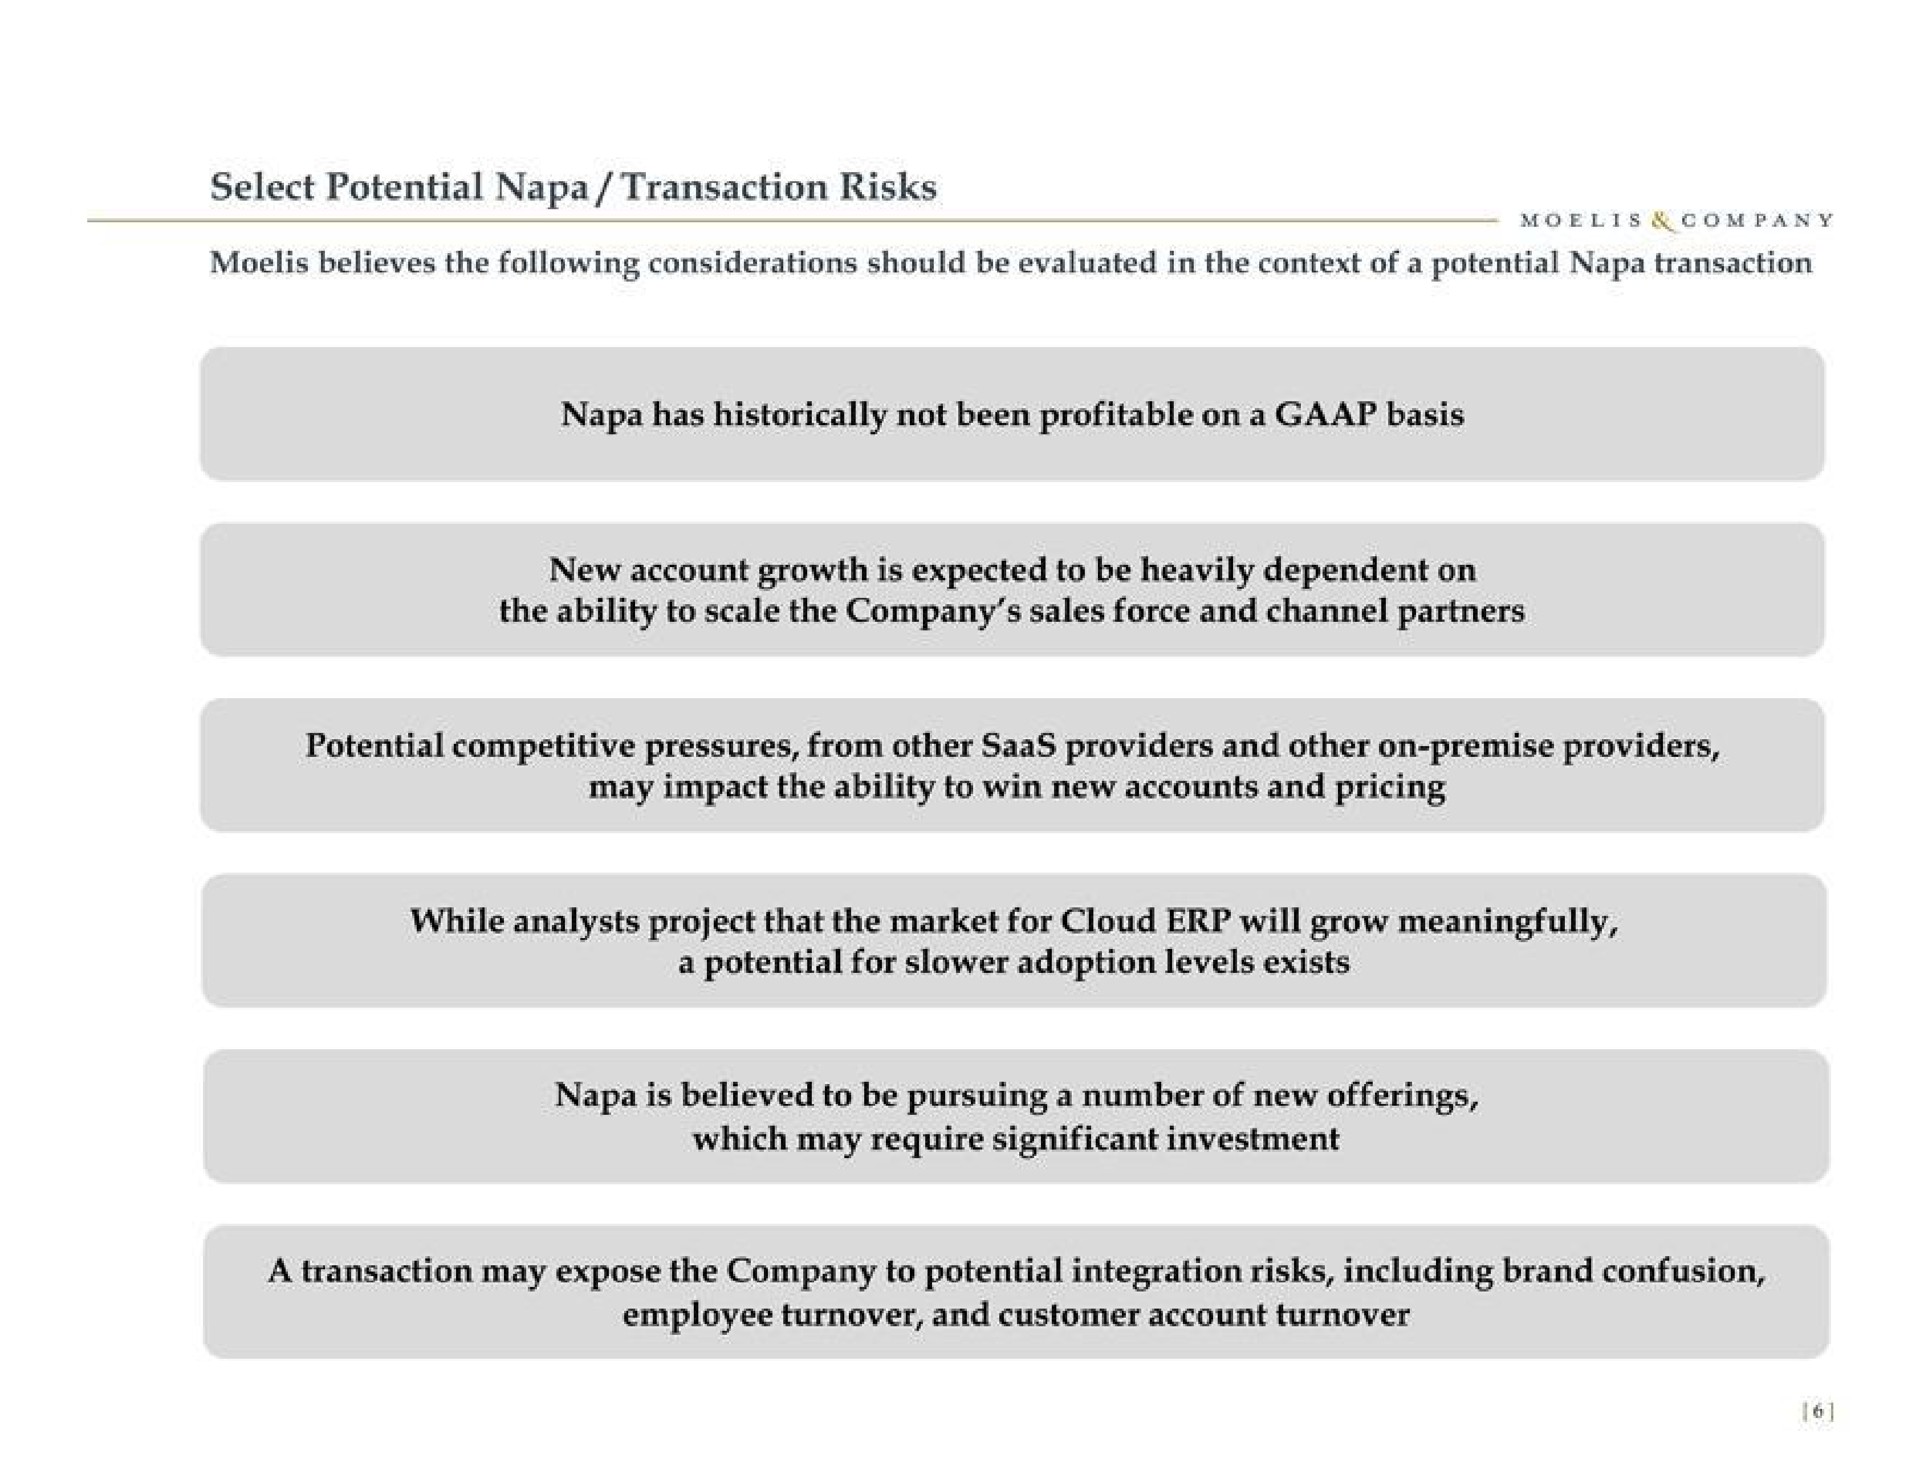 select potential napa transaction risks believes the following considerations should be evaluated in the context of a potential napa transaction napa has historically not been profitable on a basis new account growth is expected to be heavily dependent on the ability to scale the company sales force and channel partners potential competitive pressures from other providers and other on premise providers may impact the ability to win new accounts and pricing while analysts project that the market for cloud will grow meaningfully a potential for adoption levels exists napa is believed to be pursuing a number of new offerings which may require significant investment a transaction may expose the company to potential integration risks including brand confusion employee turnover and customer account turnover | Moelis & Company